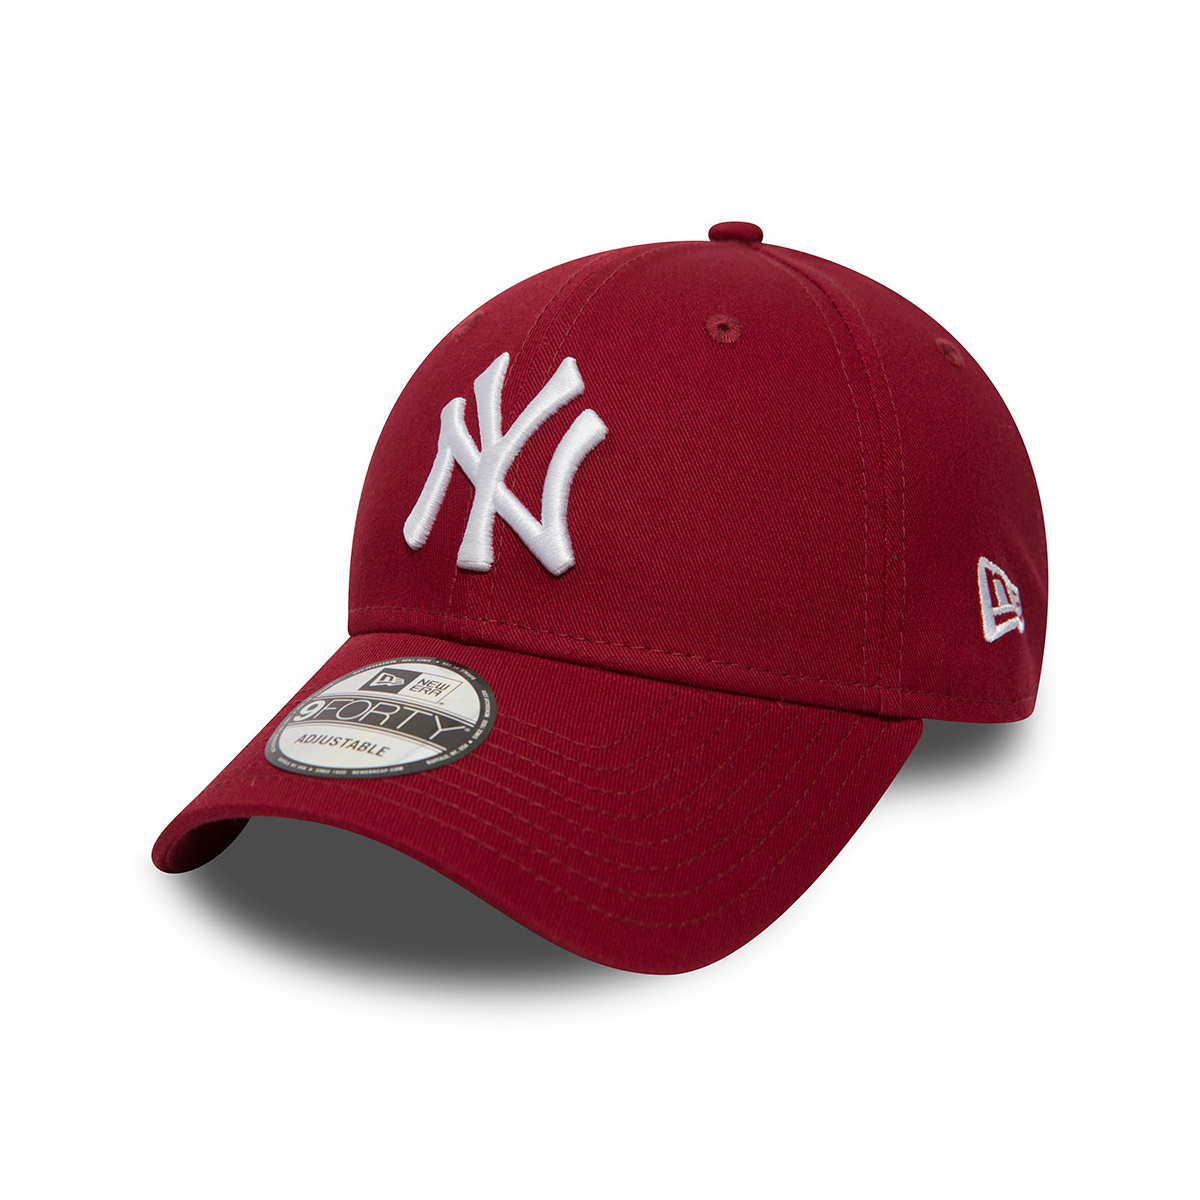 Baseball cap Essential 940 NY red - NEw Era Reference : 8282